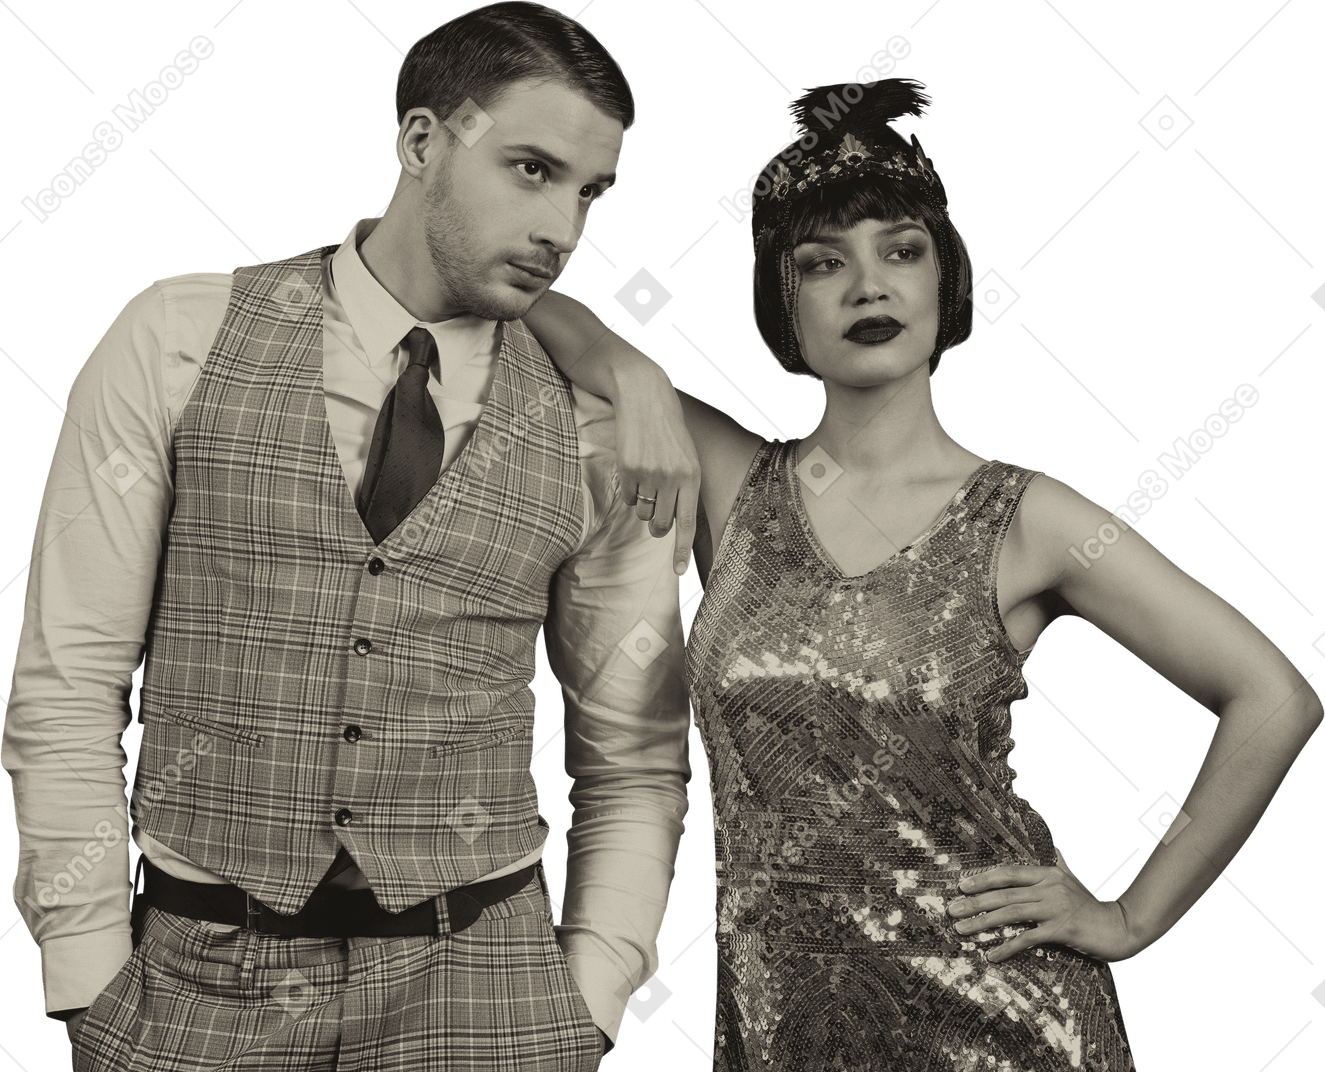 Well-dressed retro-styled couple posing in the dark